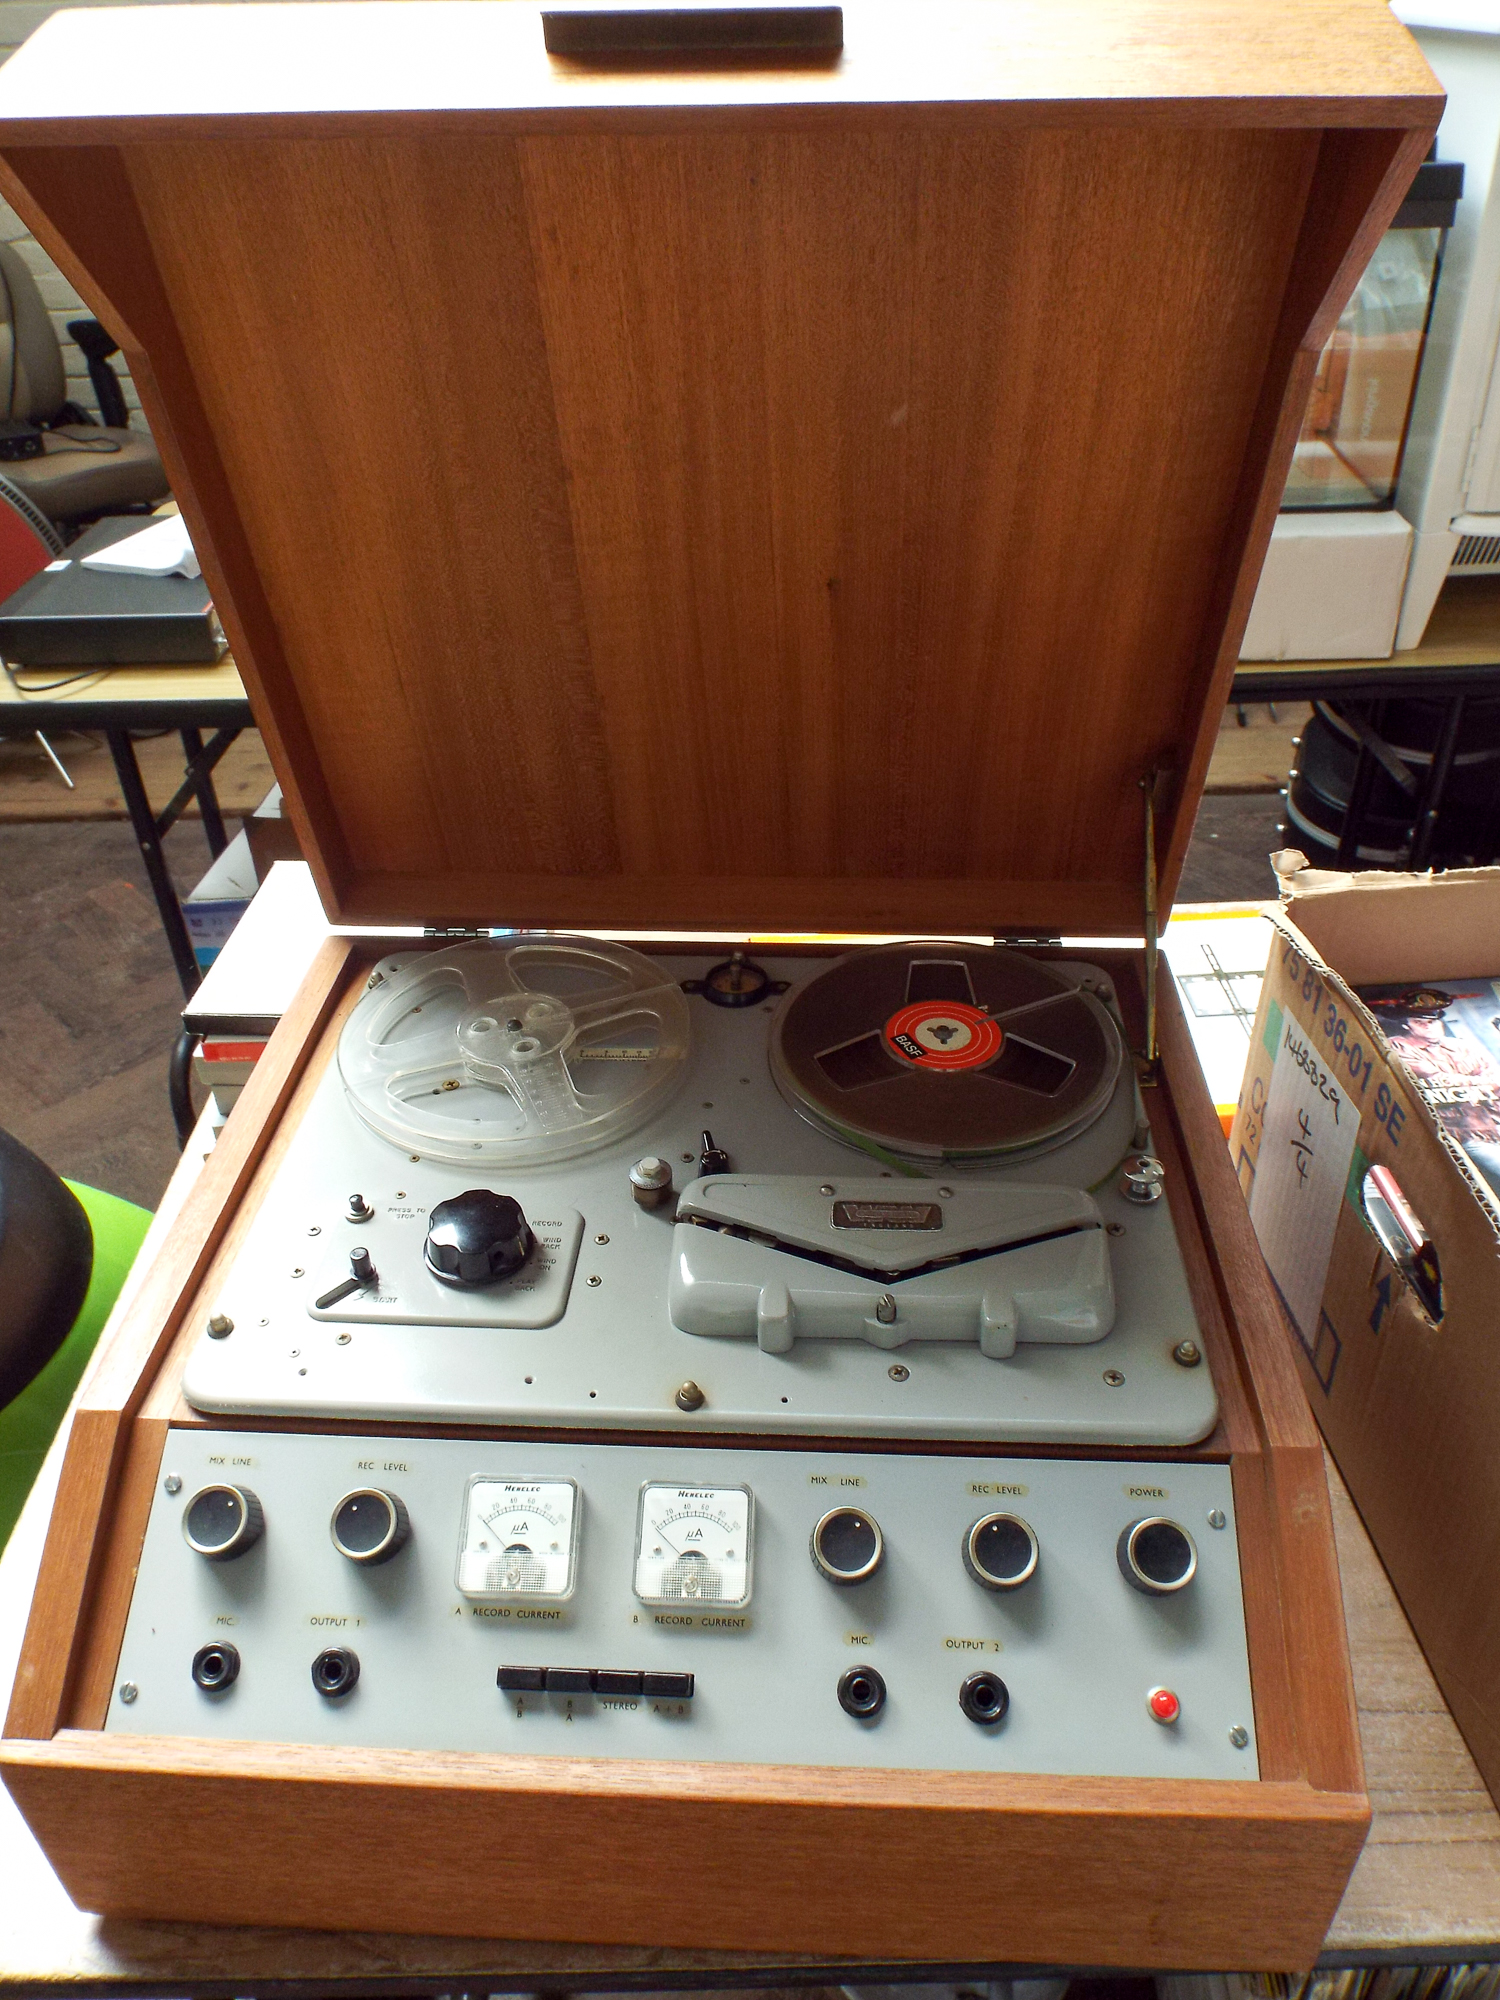 A Wearite large reel to reel tape machine in teak cabinet with some tapes